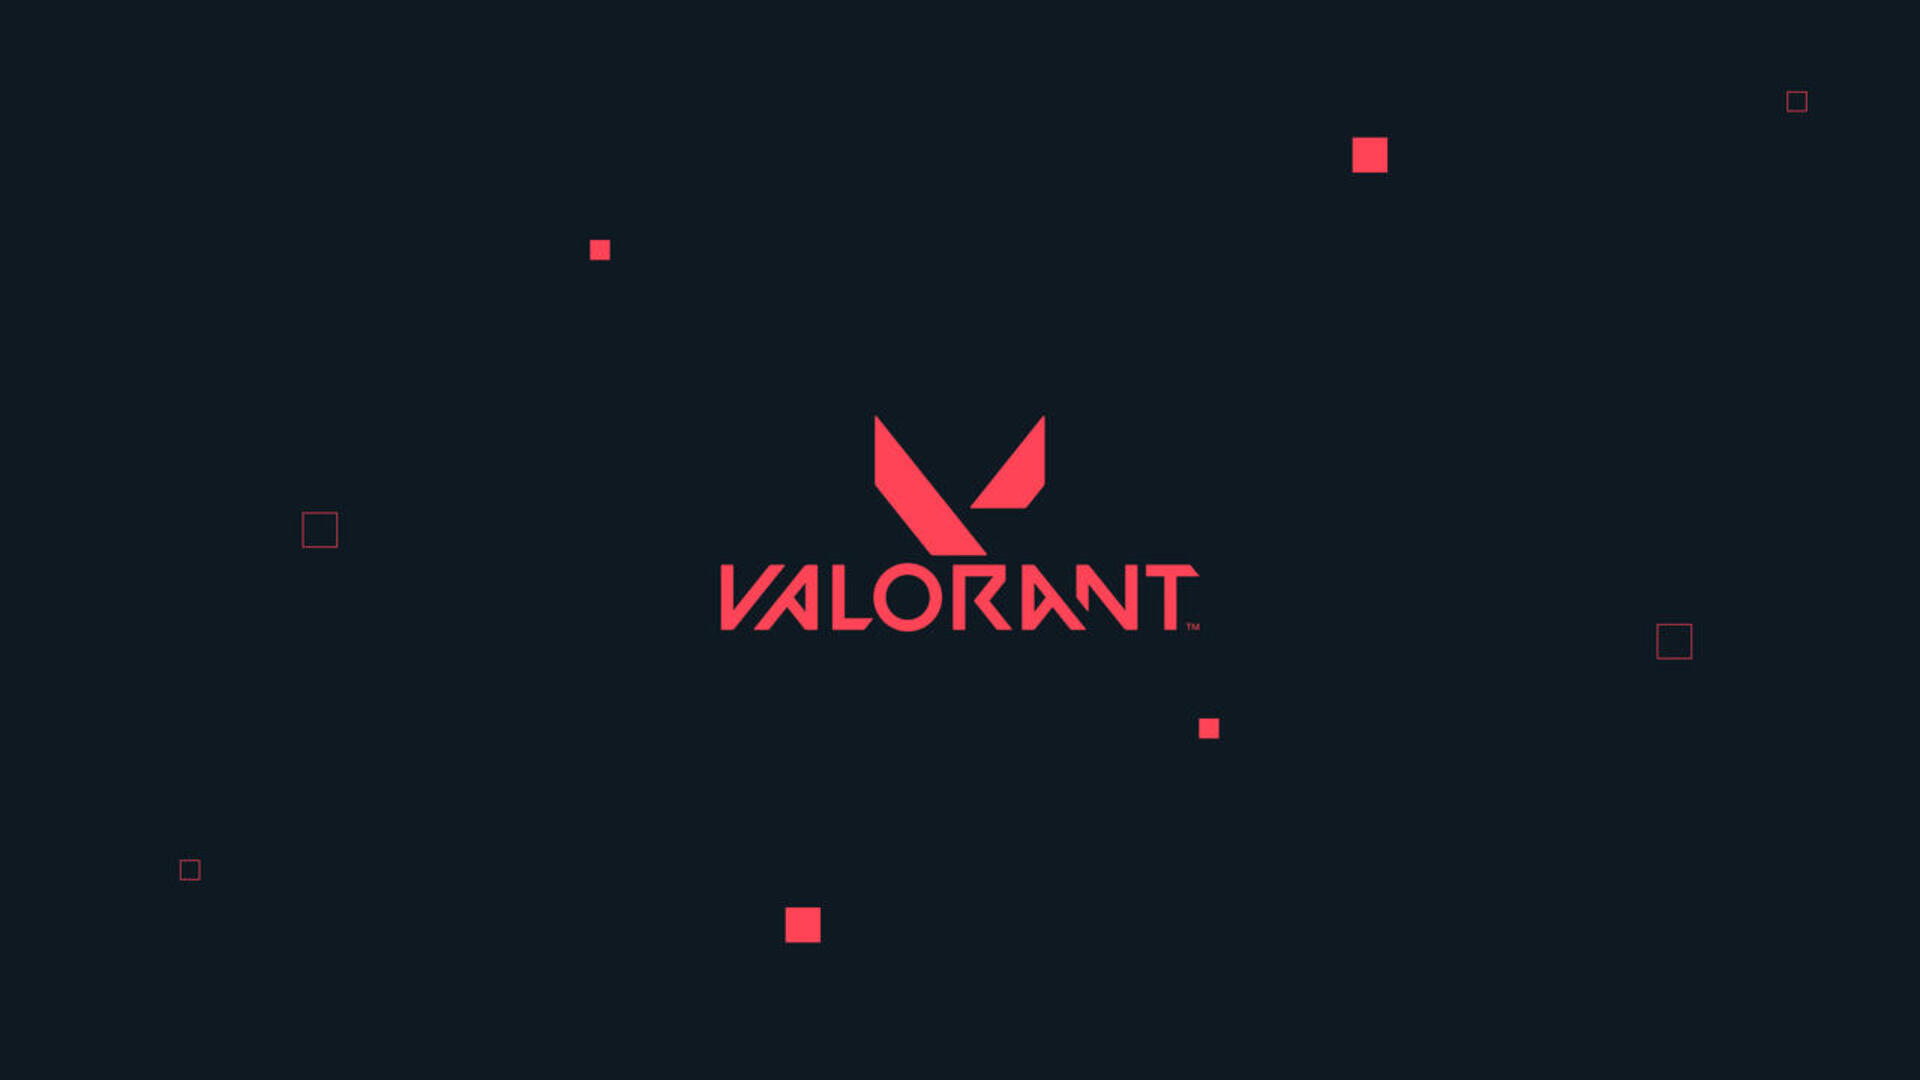 Image by N/A – The plain Valorant logo over a black background with some red cubes.